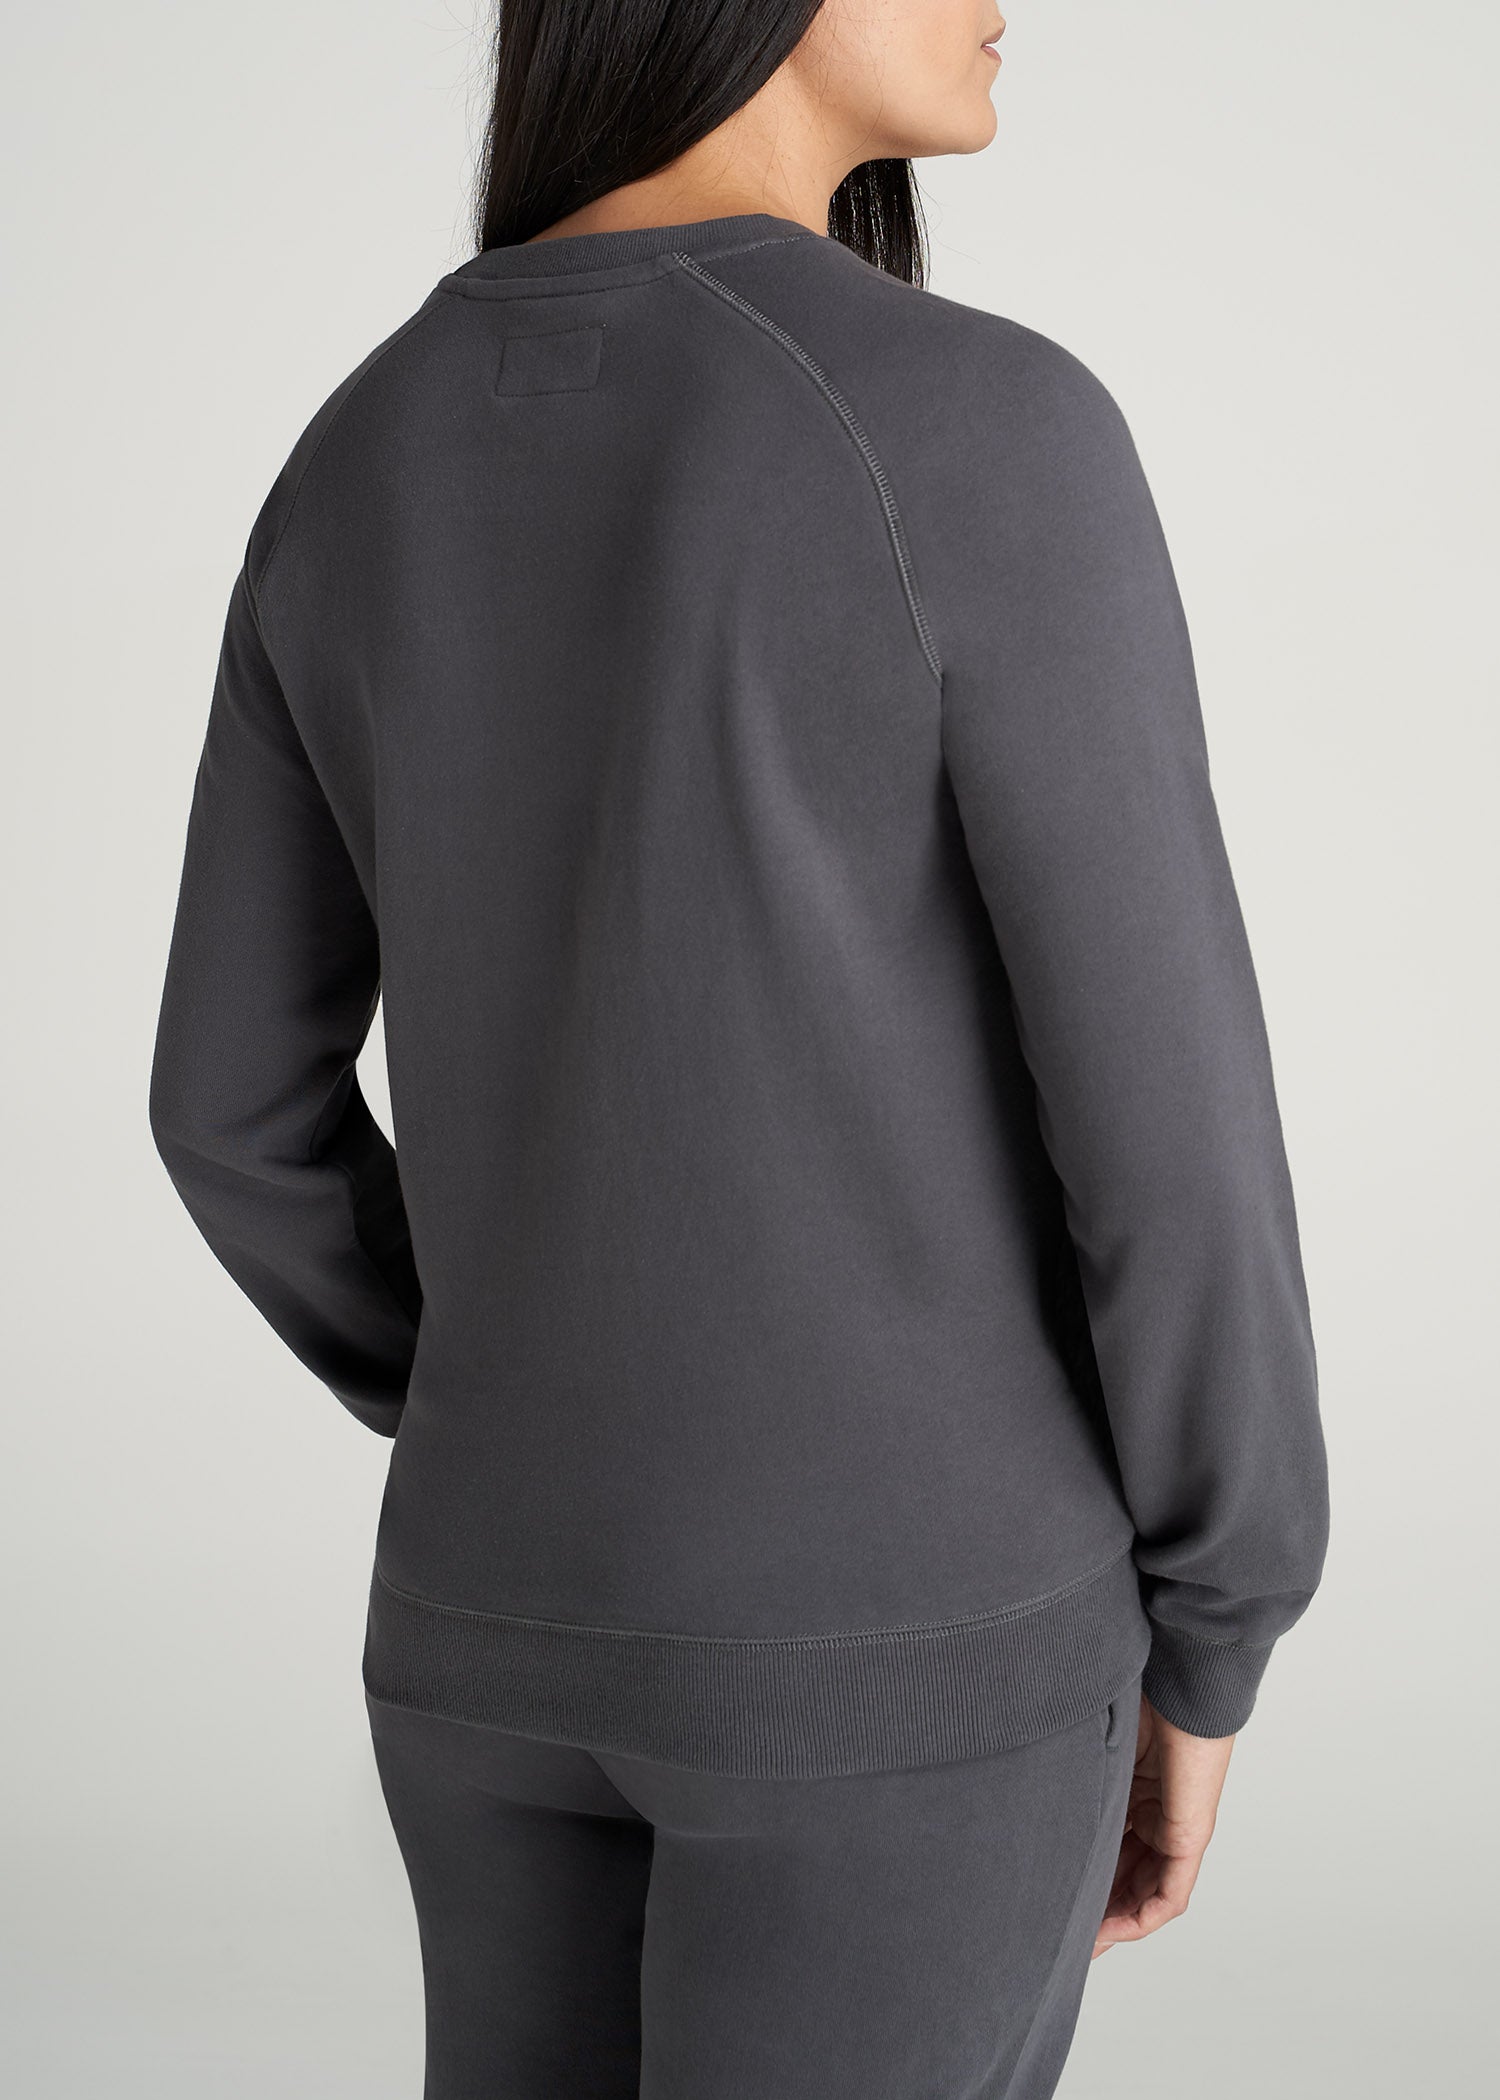 American-Tall-Women-Womens-FrenchTerry-CrewNeck-Charcoal-back